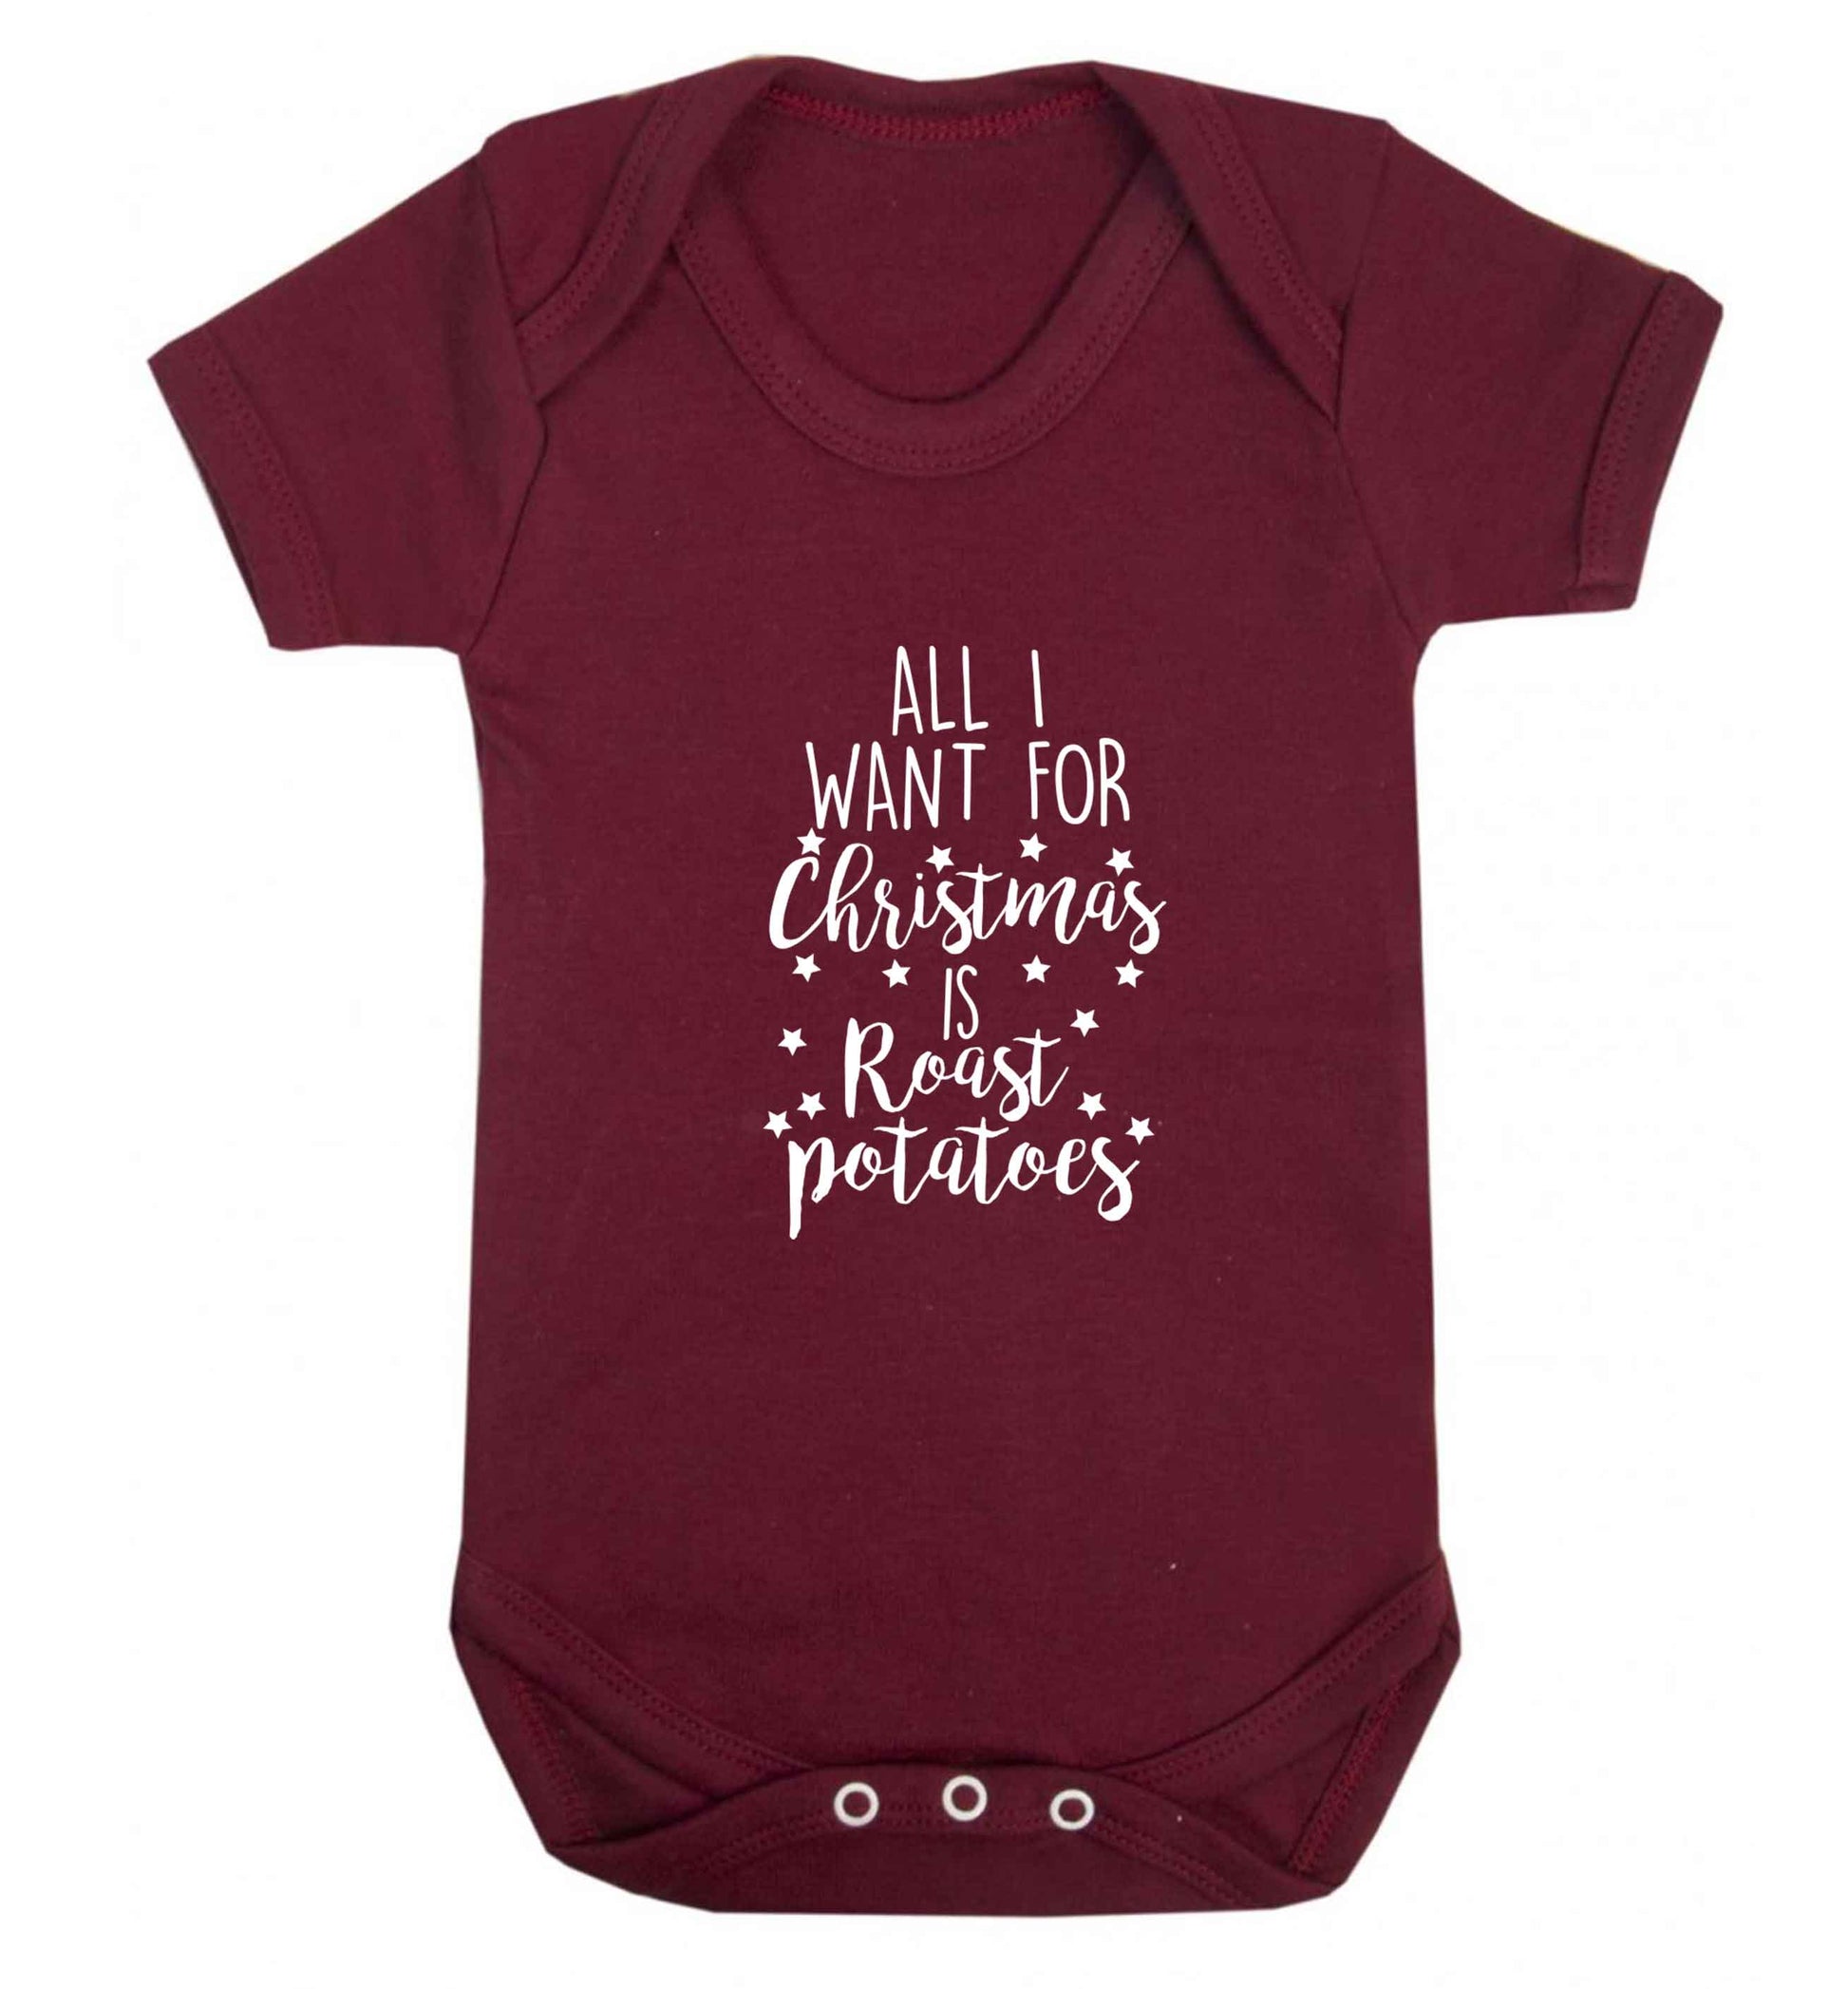 All I want for Christmas is roast potatoes baby vest maroon 18-24 months